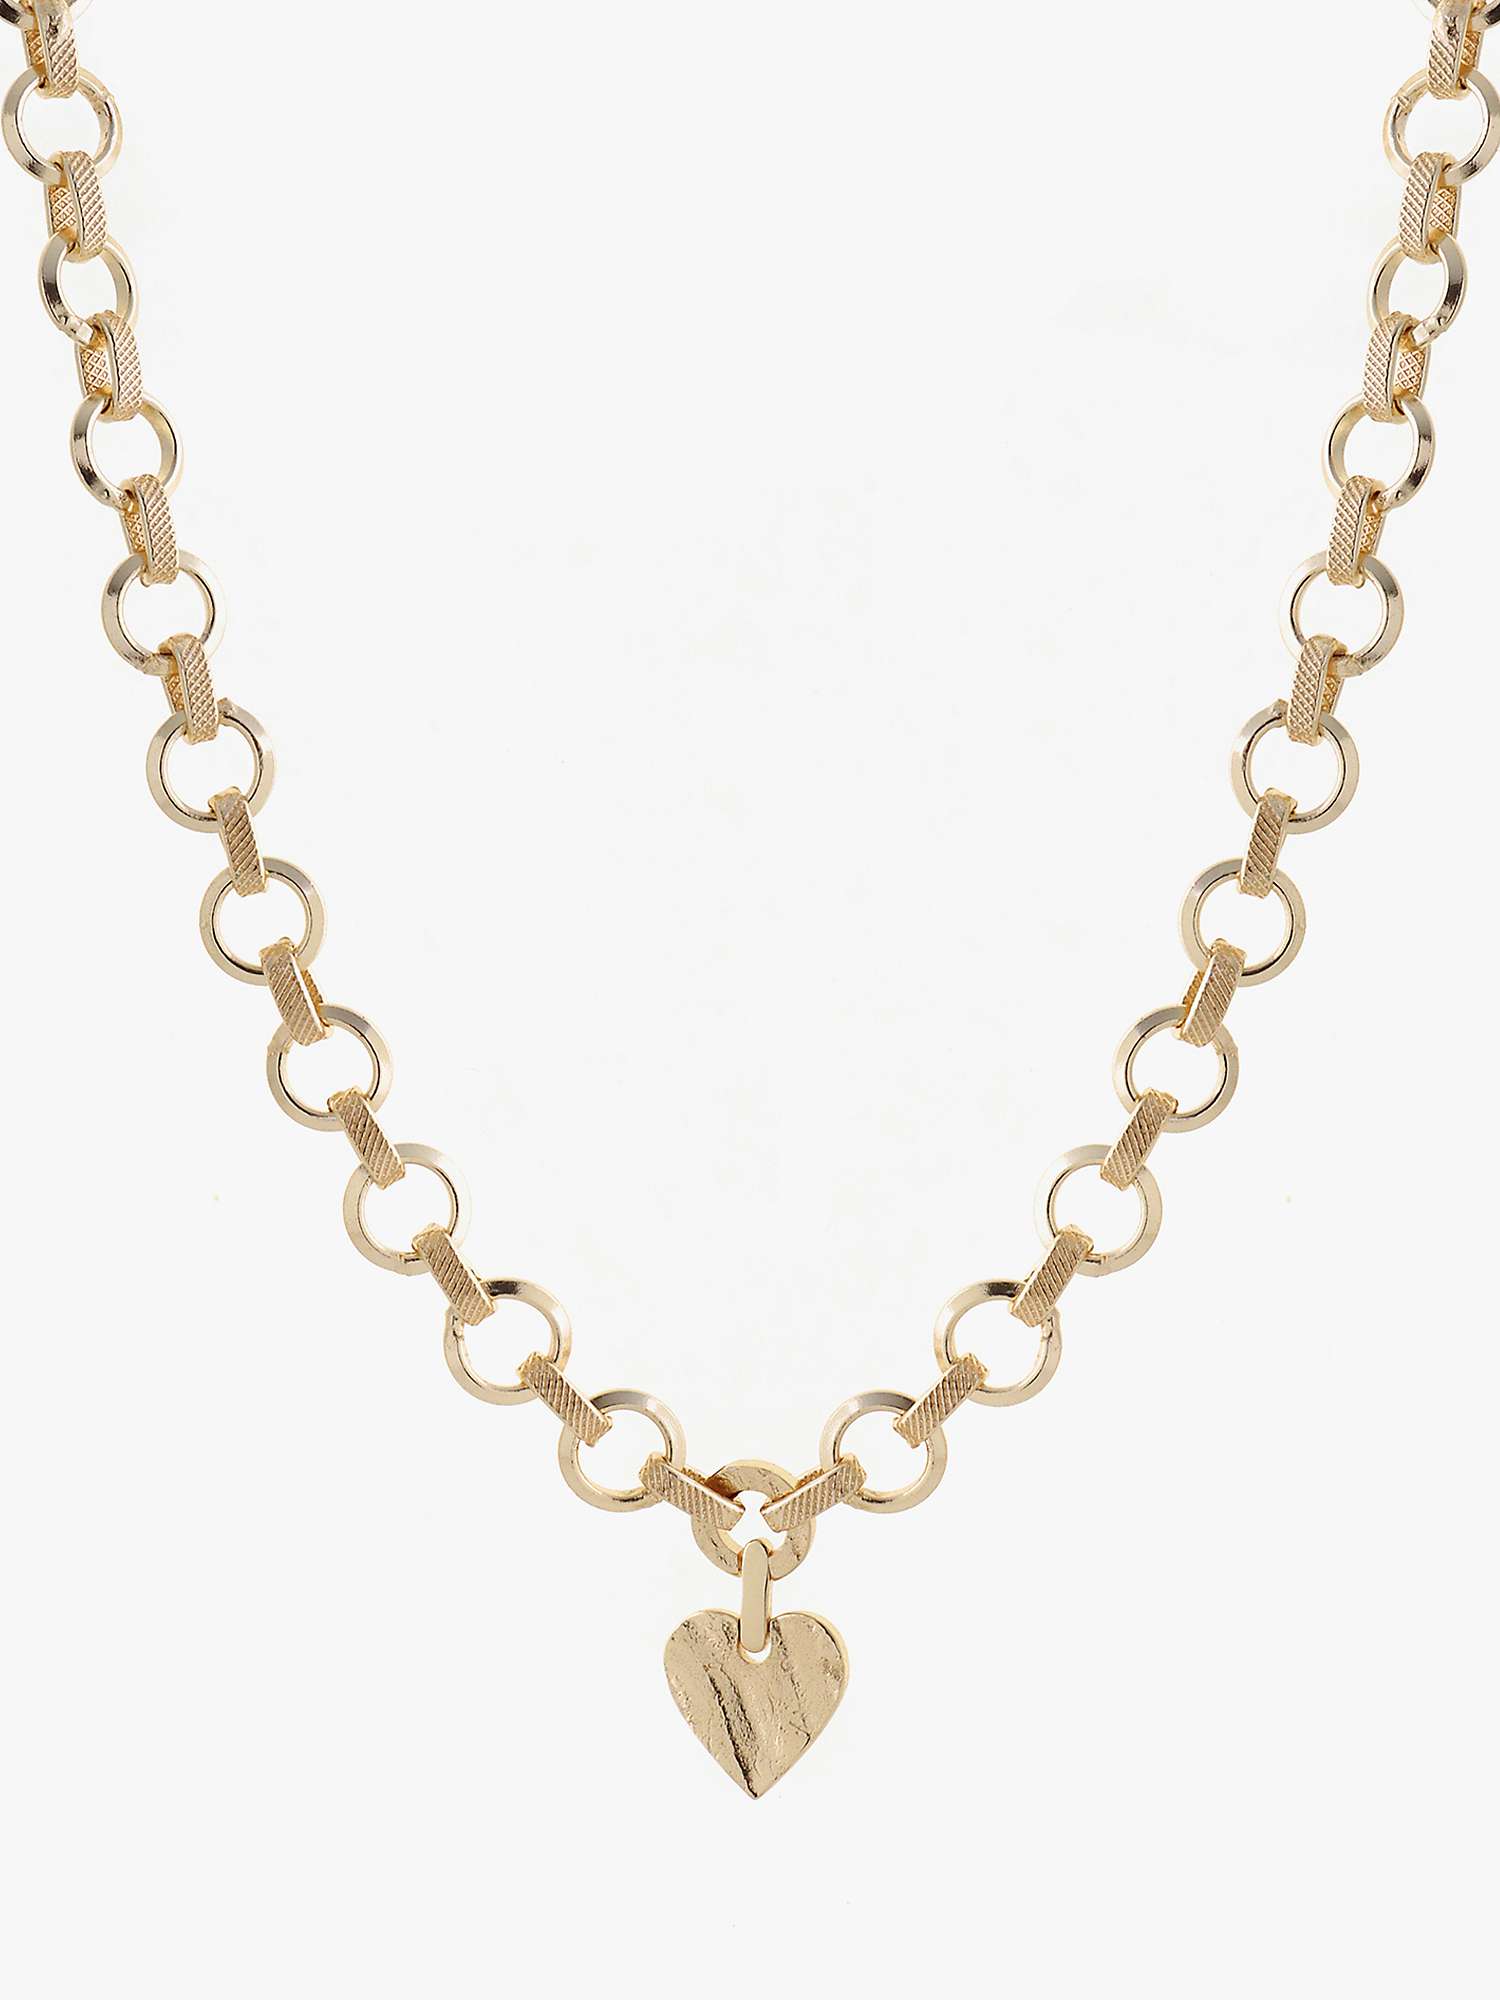 Buy Tutti & Co Precious Heart Necklace, Gold Online at johnlewis.com